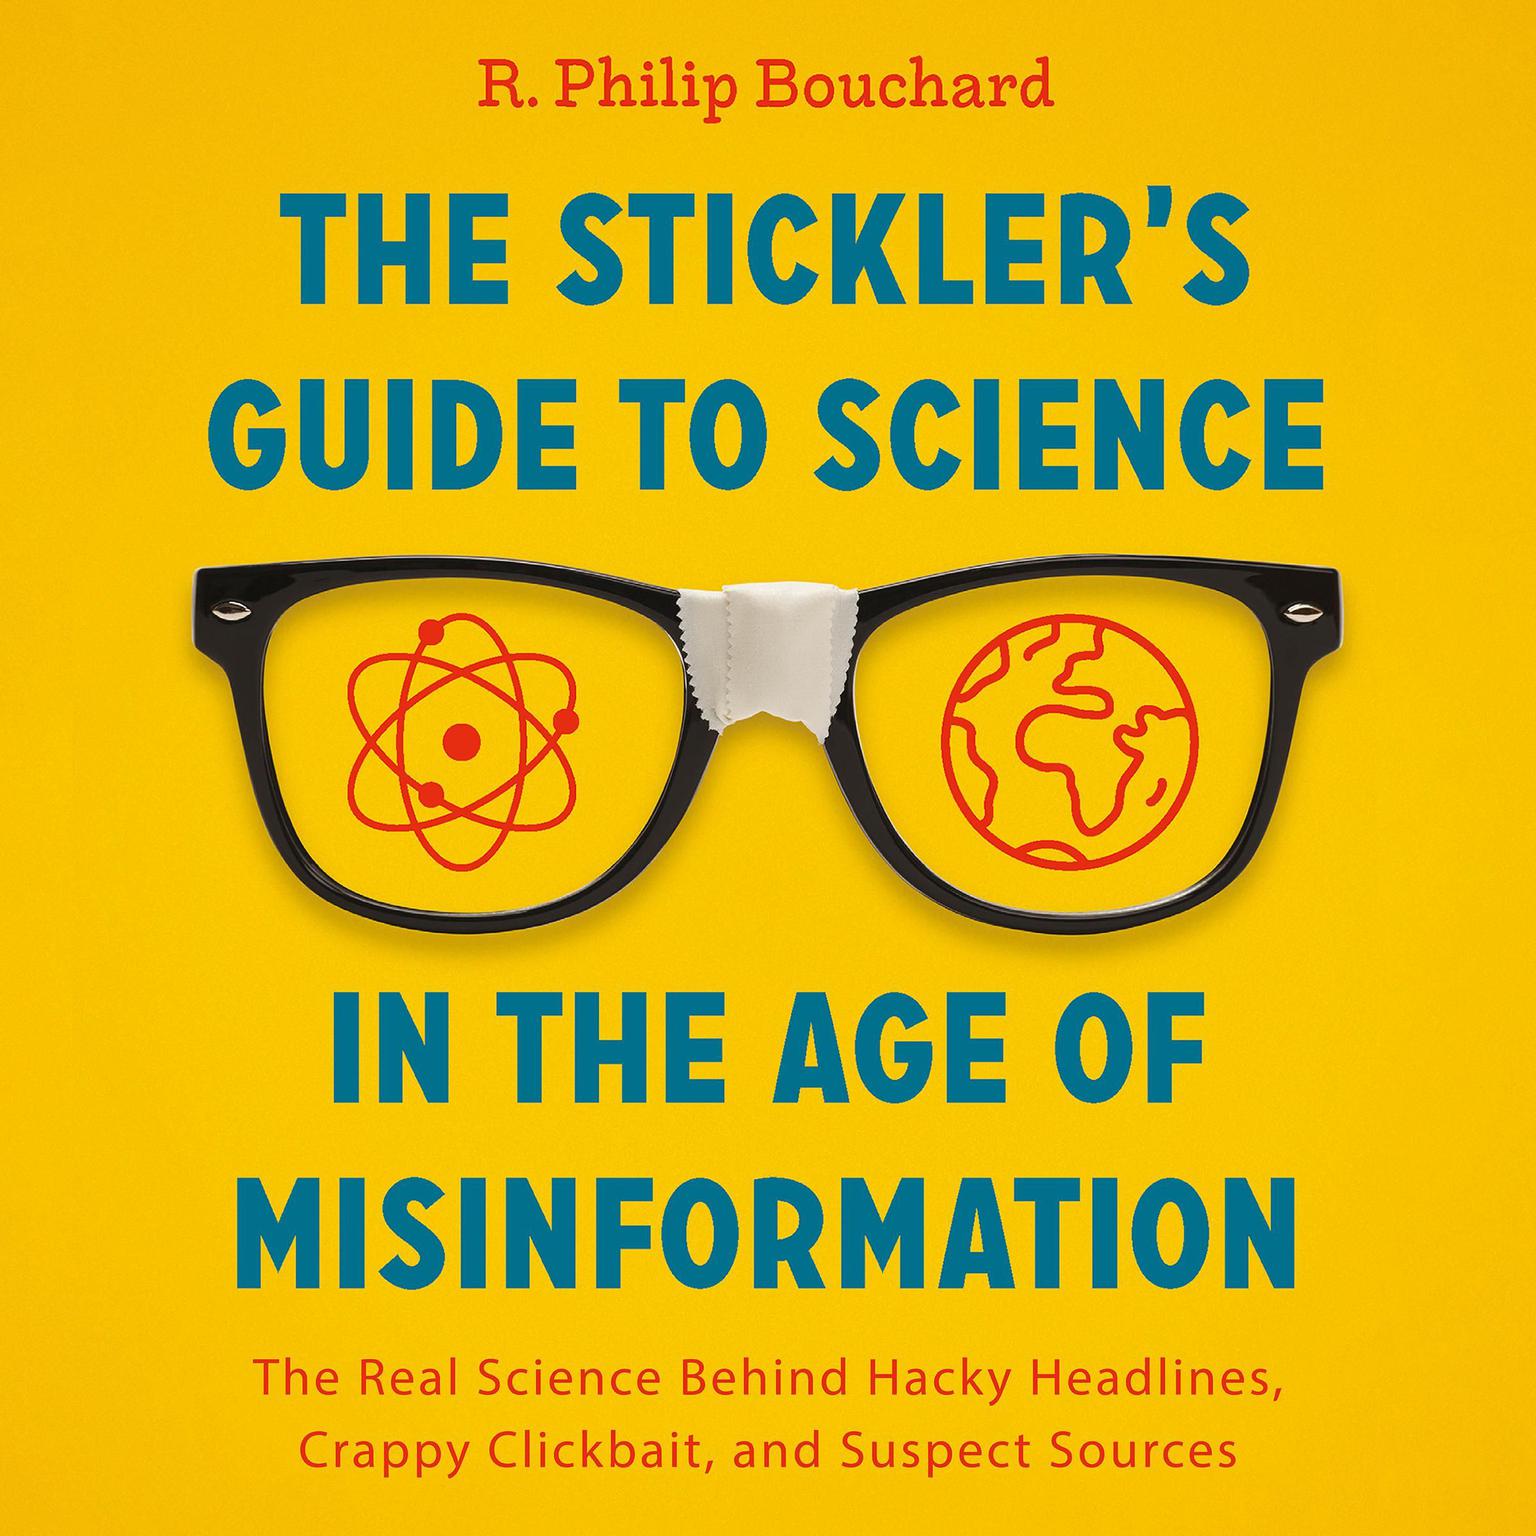 The Sticklers Guide to Science in the Age of Misinformation: The Real Science Behind Hacky Headlines, Crappy Clickbait, and Suspect Sources Audiobook, by R. Philip Bouchard